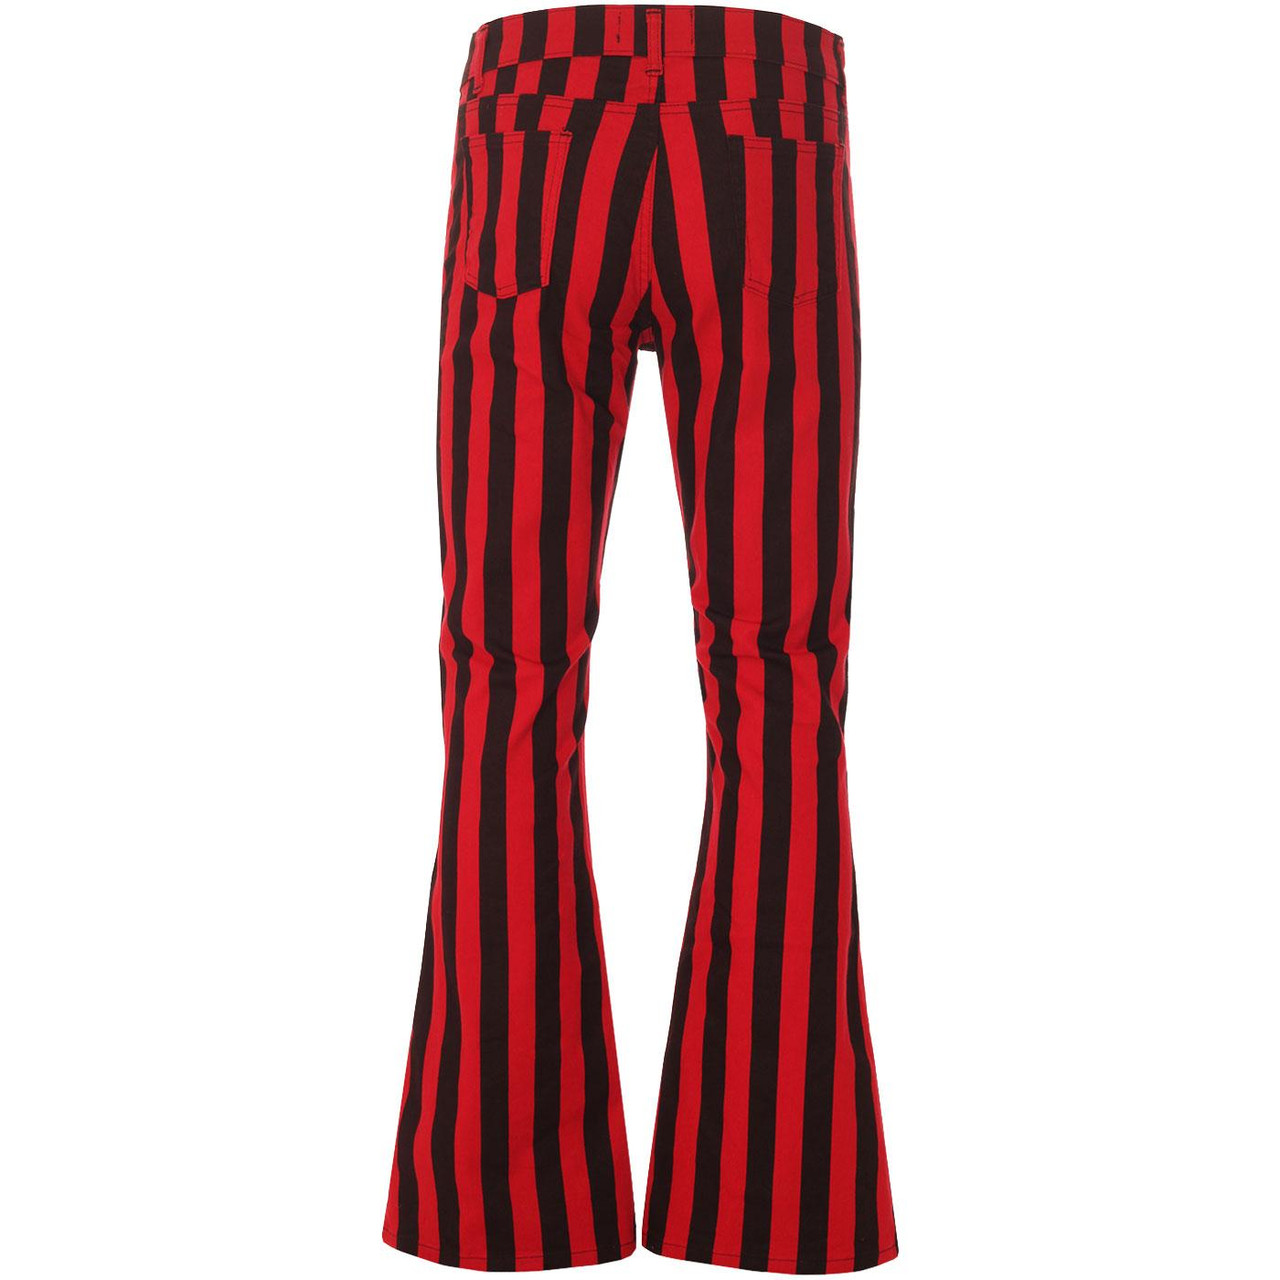 Holy Roller Stripe Flares  MADCAP ENGLAND Retro 60s Flared Trousers